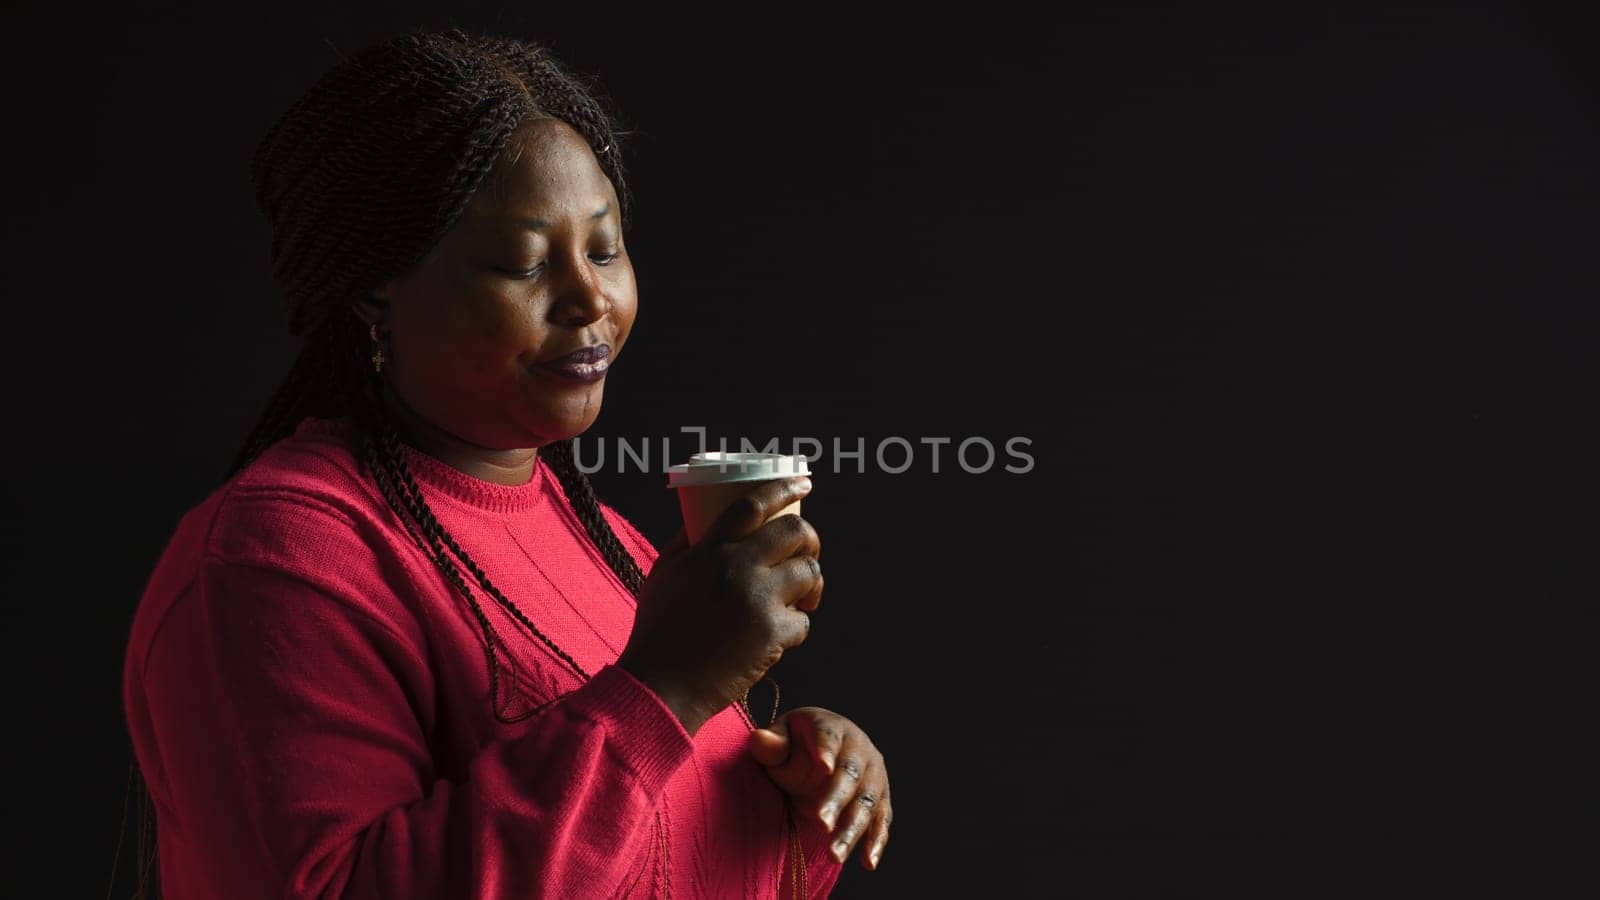 African american woman immersed in pleasure of sipping coffee lost in contemplation gazing upwards. Female fashion blogger savors her warm beverage with sense of satisfaction. Side-view portrait.